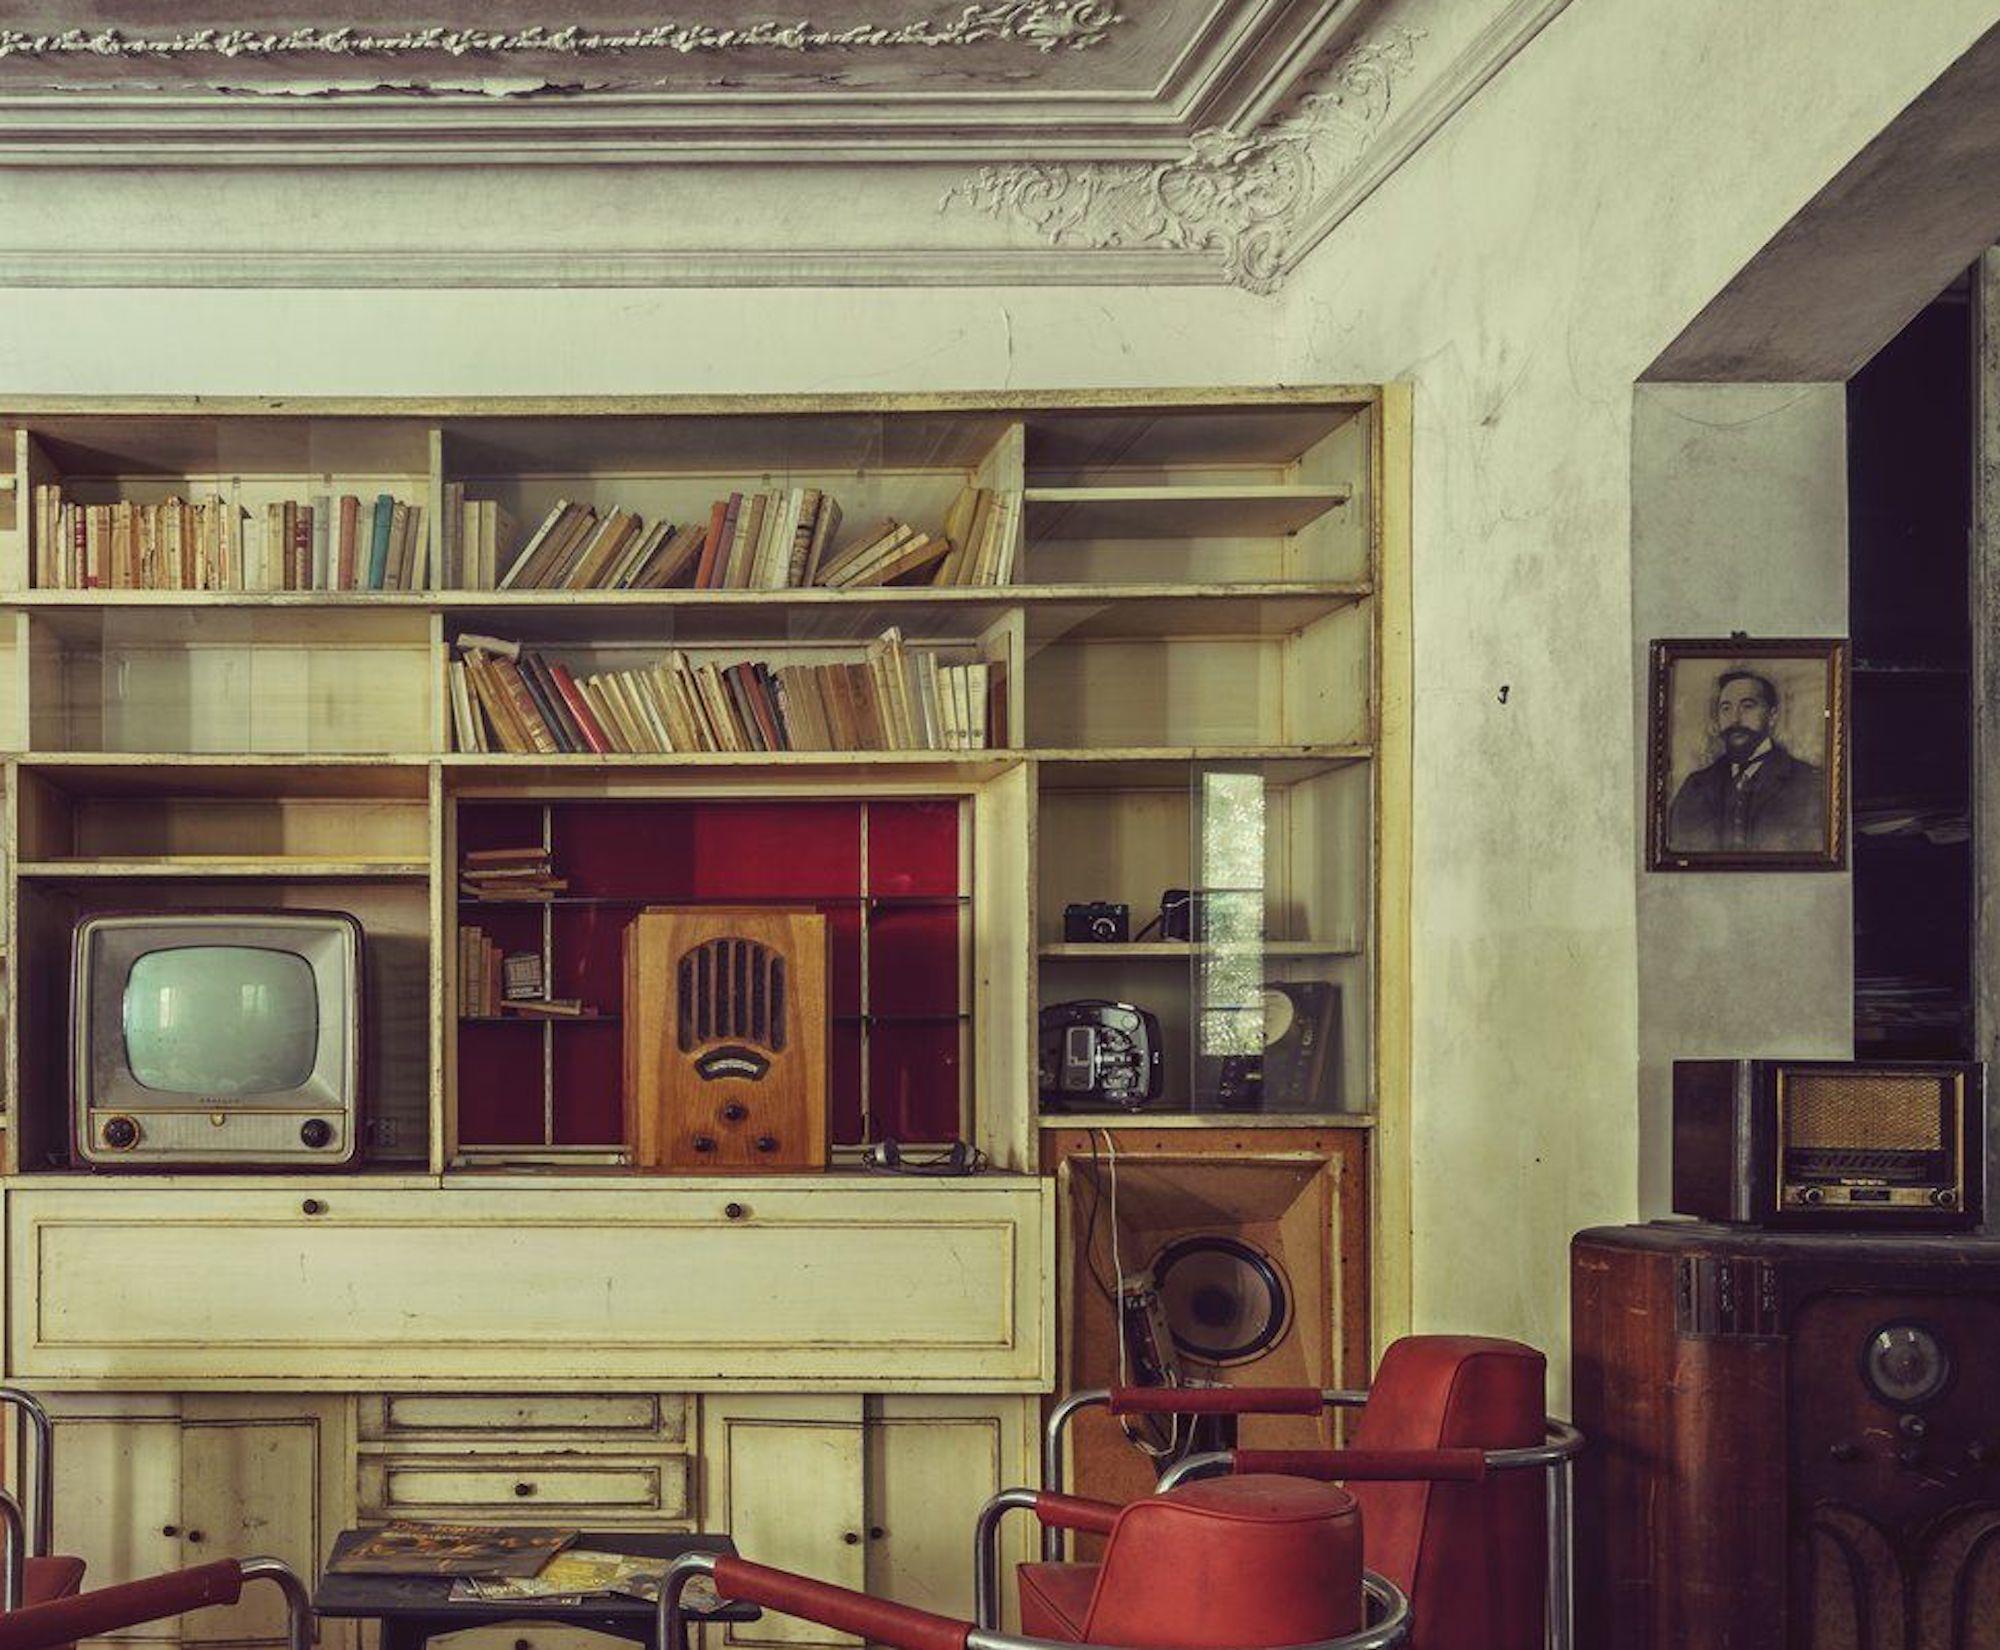 Radios in Lounge by Gina Soden - Abandoned place, urbex photography, red chairs For Sale 3